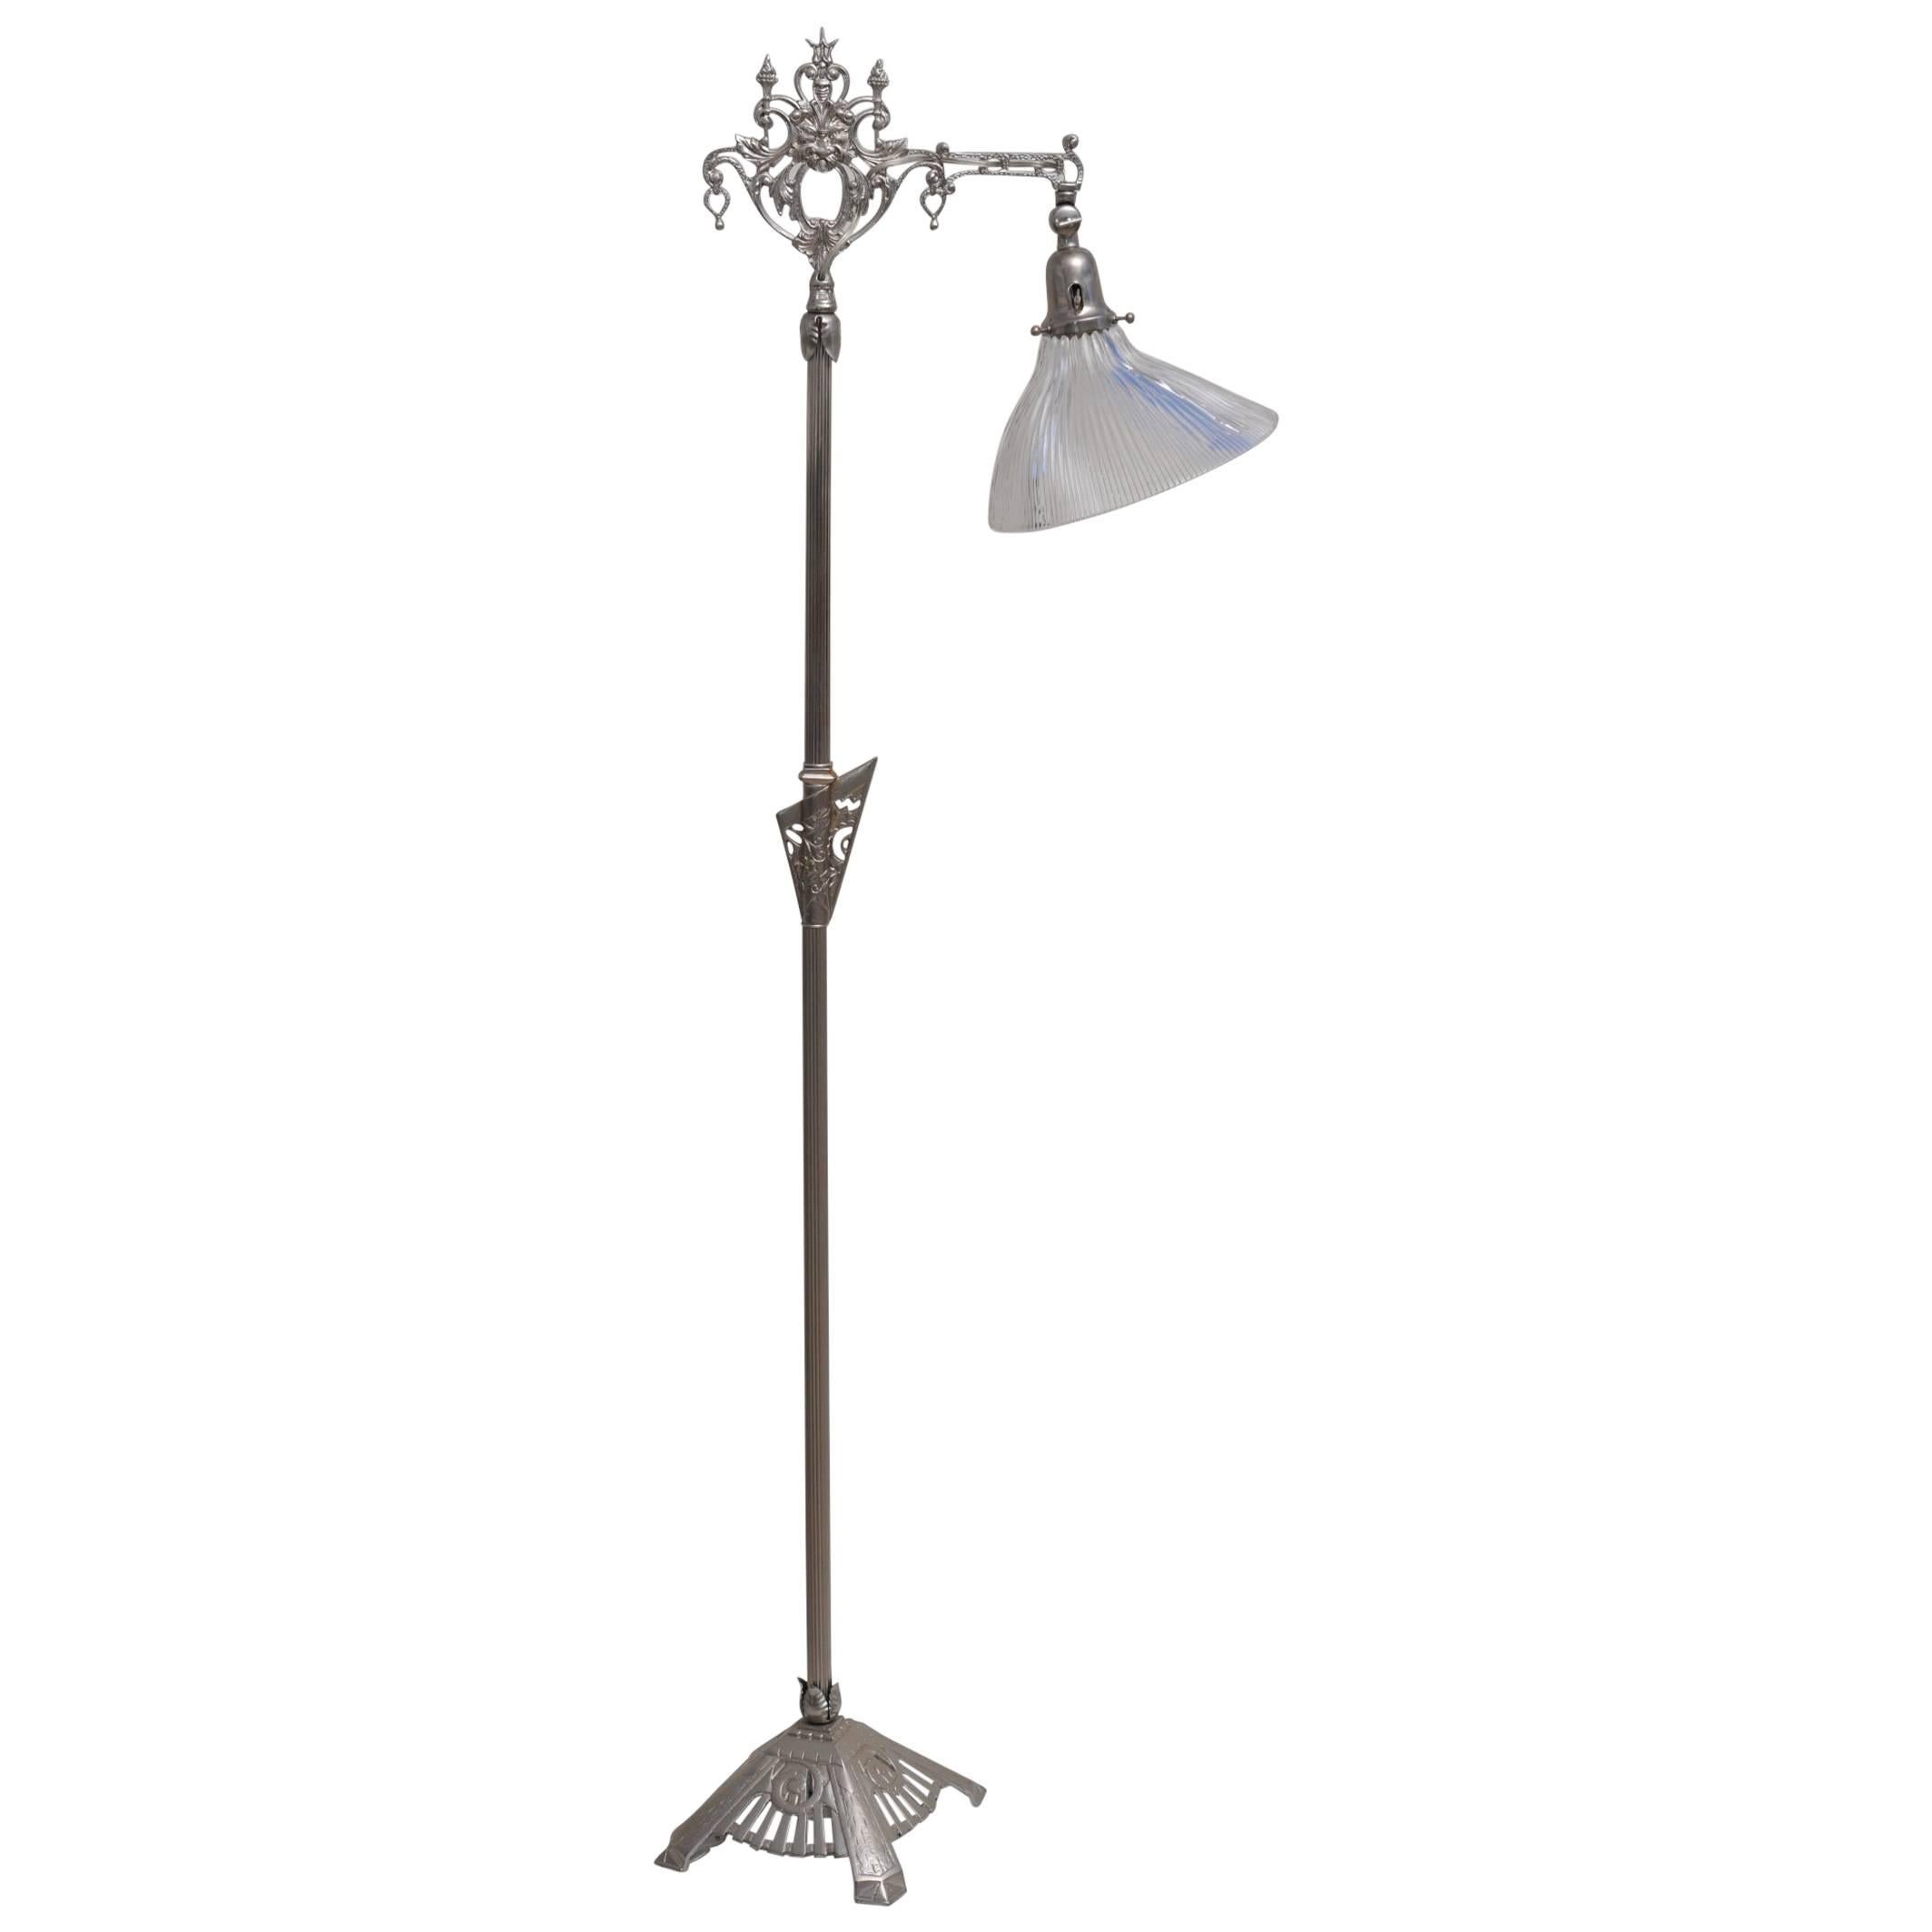 Nickel-Plated Art Deco Period Floor Lamp with Asymmetrical Holophane Shade